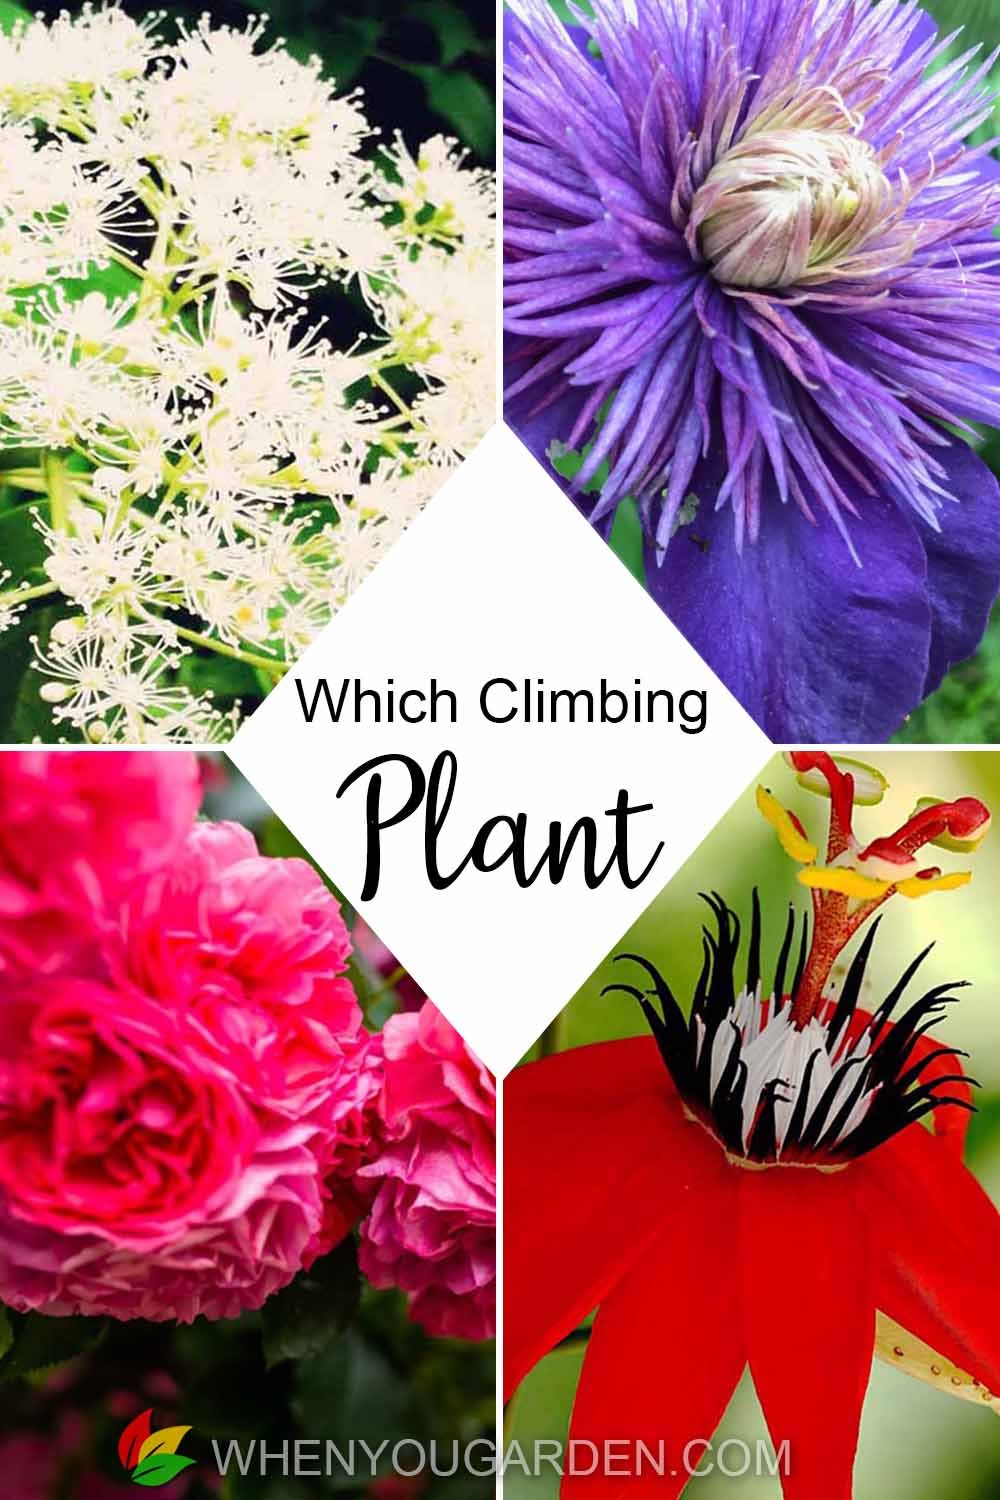 Which Climbing Plant?